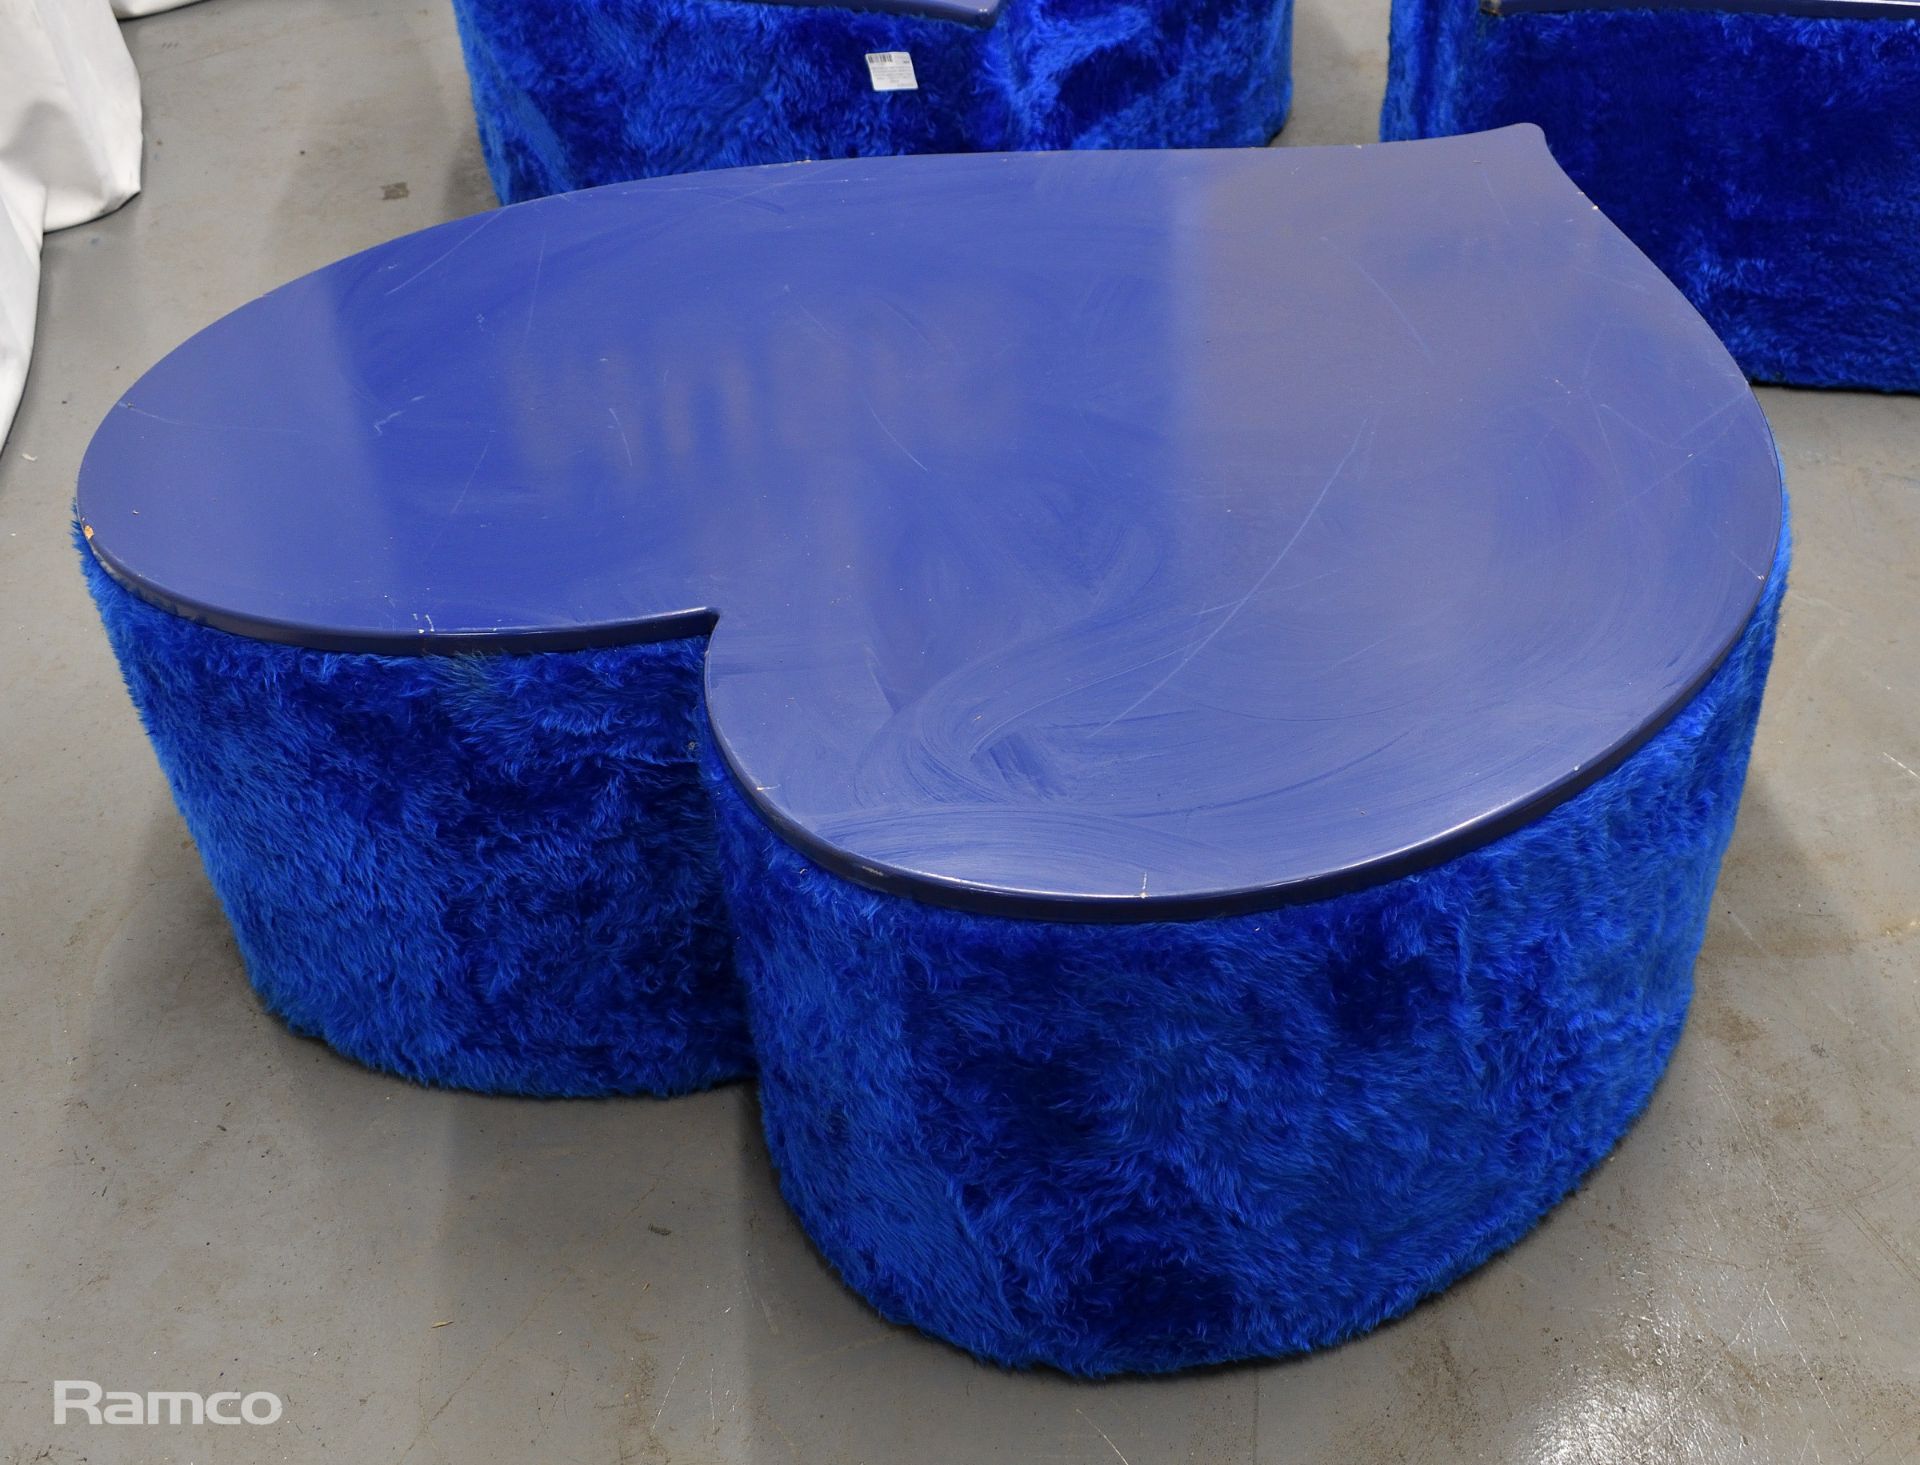 3x Asymmetrical heart shaped blue fur-covered wooden tables from countries' seating area - Image 2 of 13